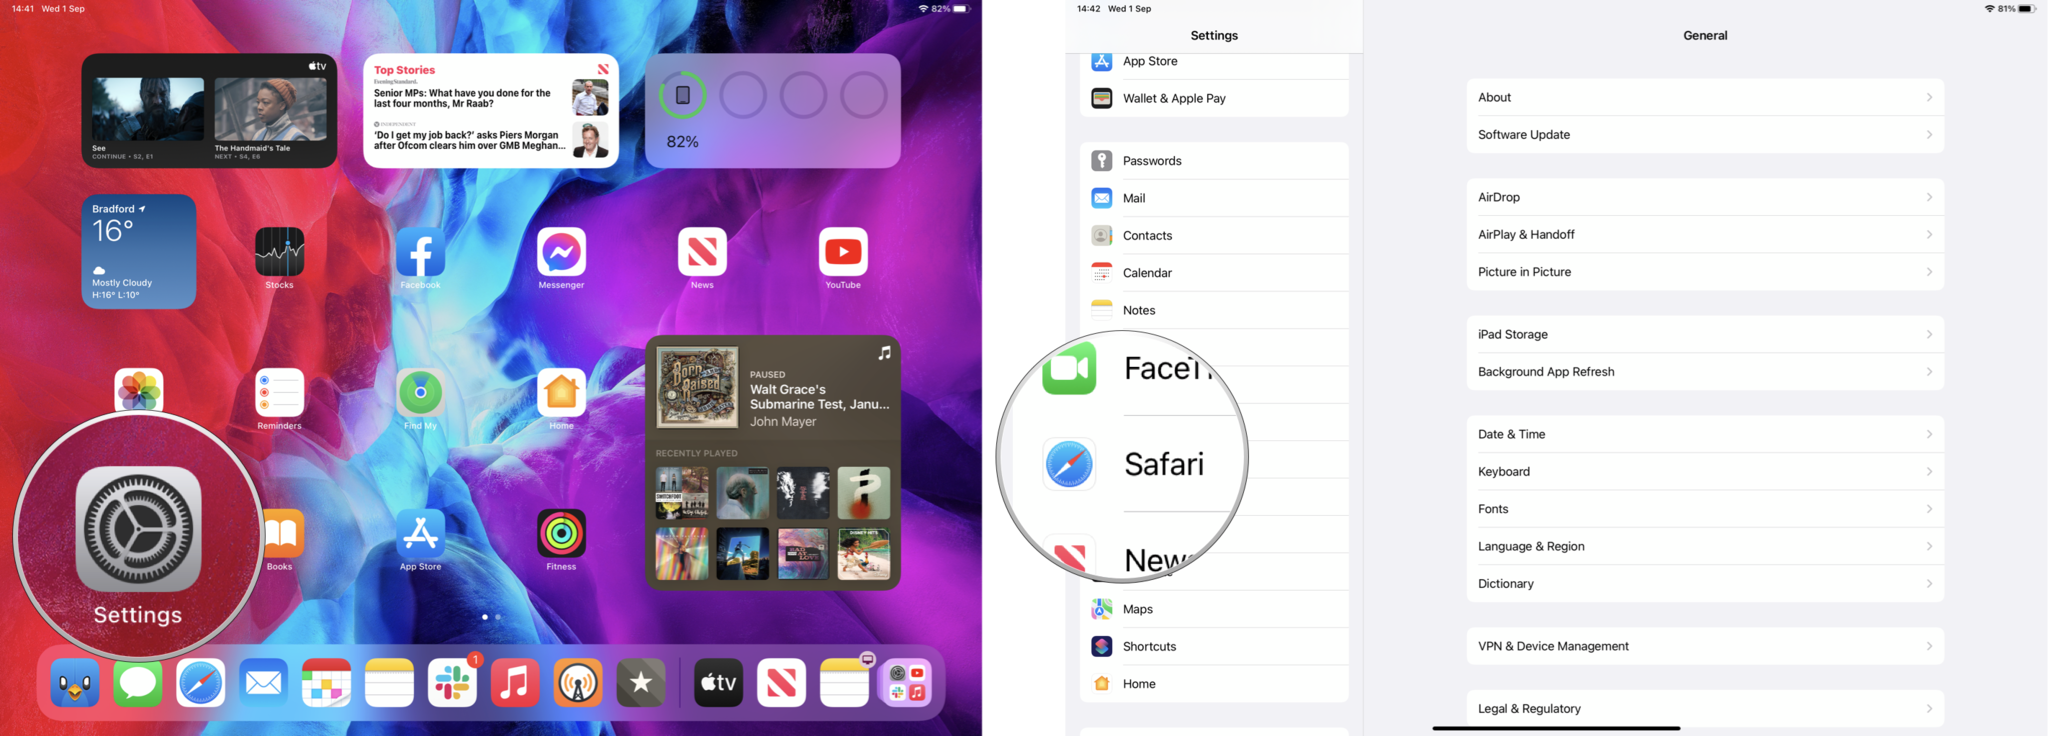 How to switch to a Compact Tab Bar: Open Settings, Tap Safari in the sidebar